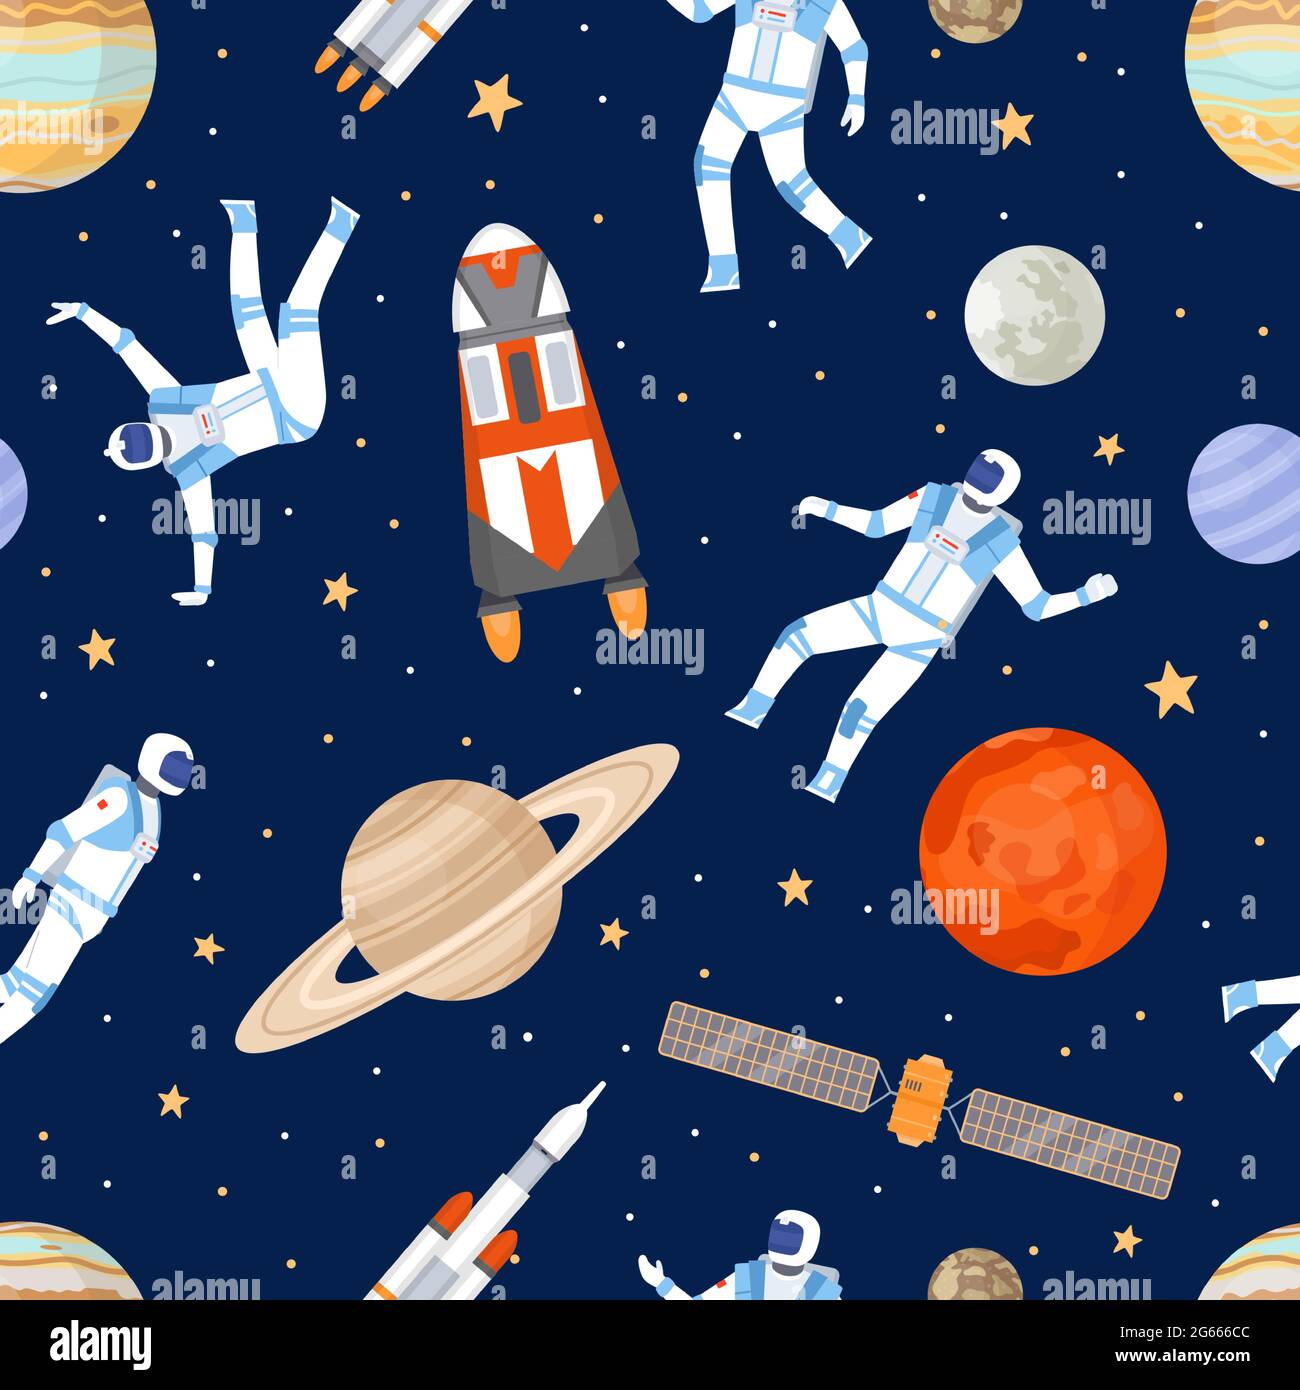 Outer space seamless pattern. Print with dancing astronaut, spaceships, satellite, stars and planets. Cosmic adventure flat vector texture Stock Vector